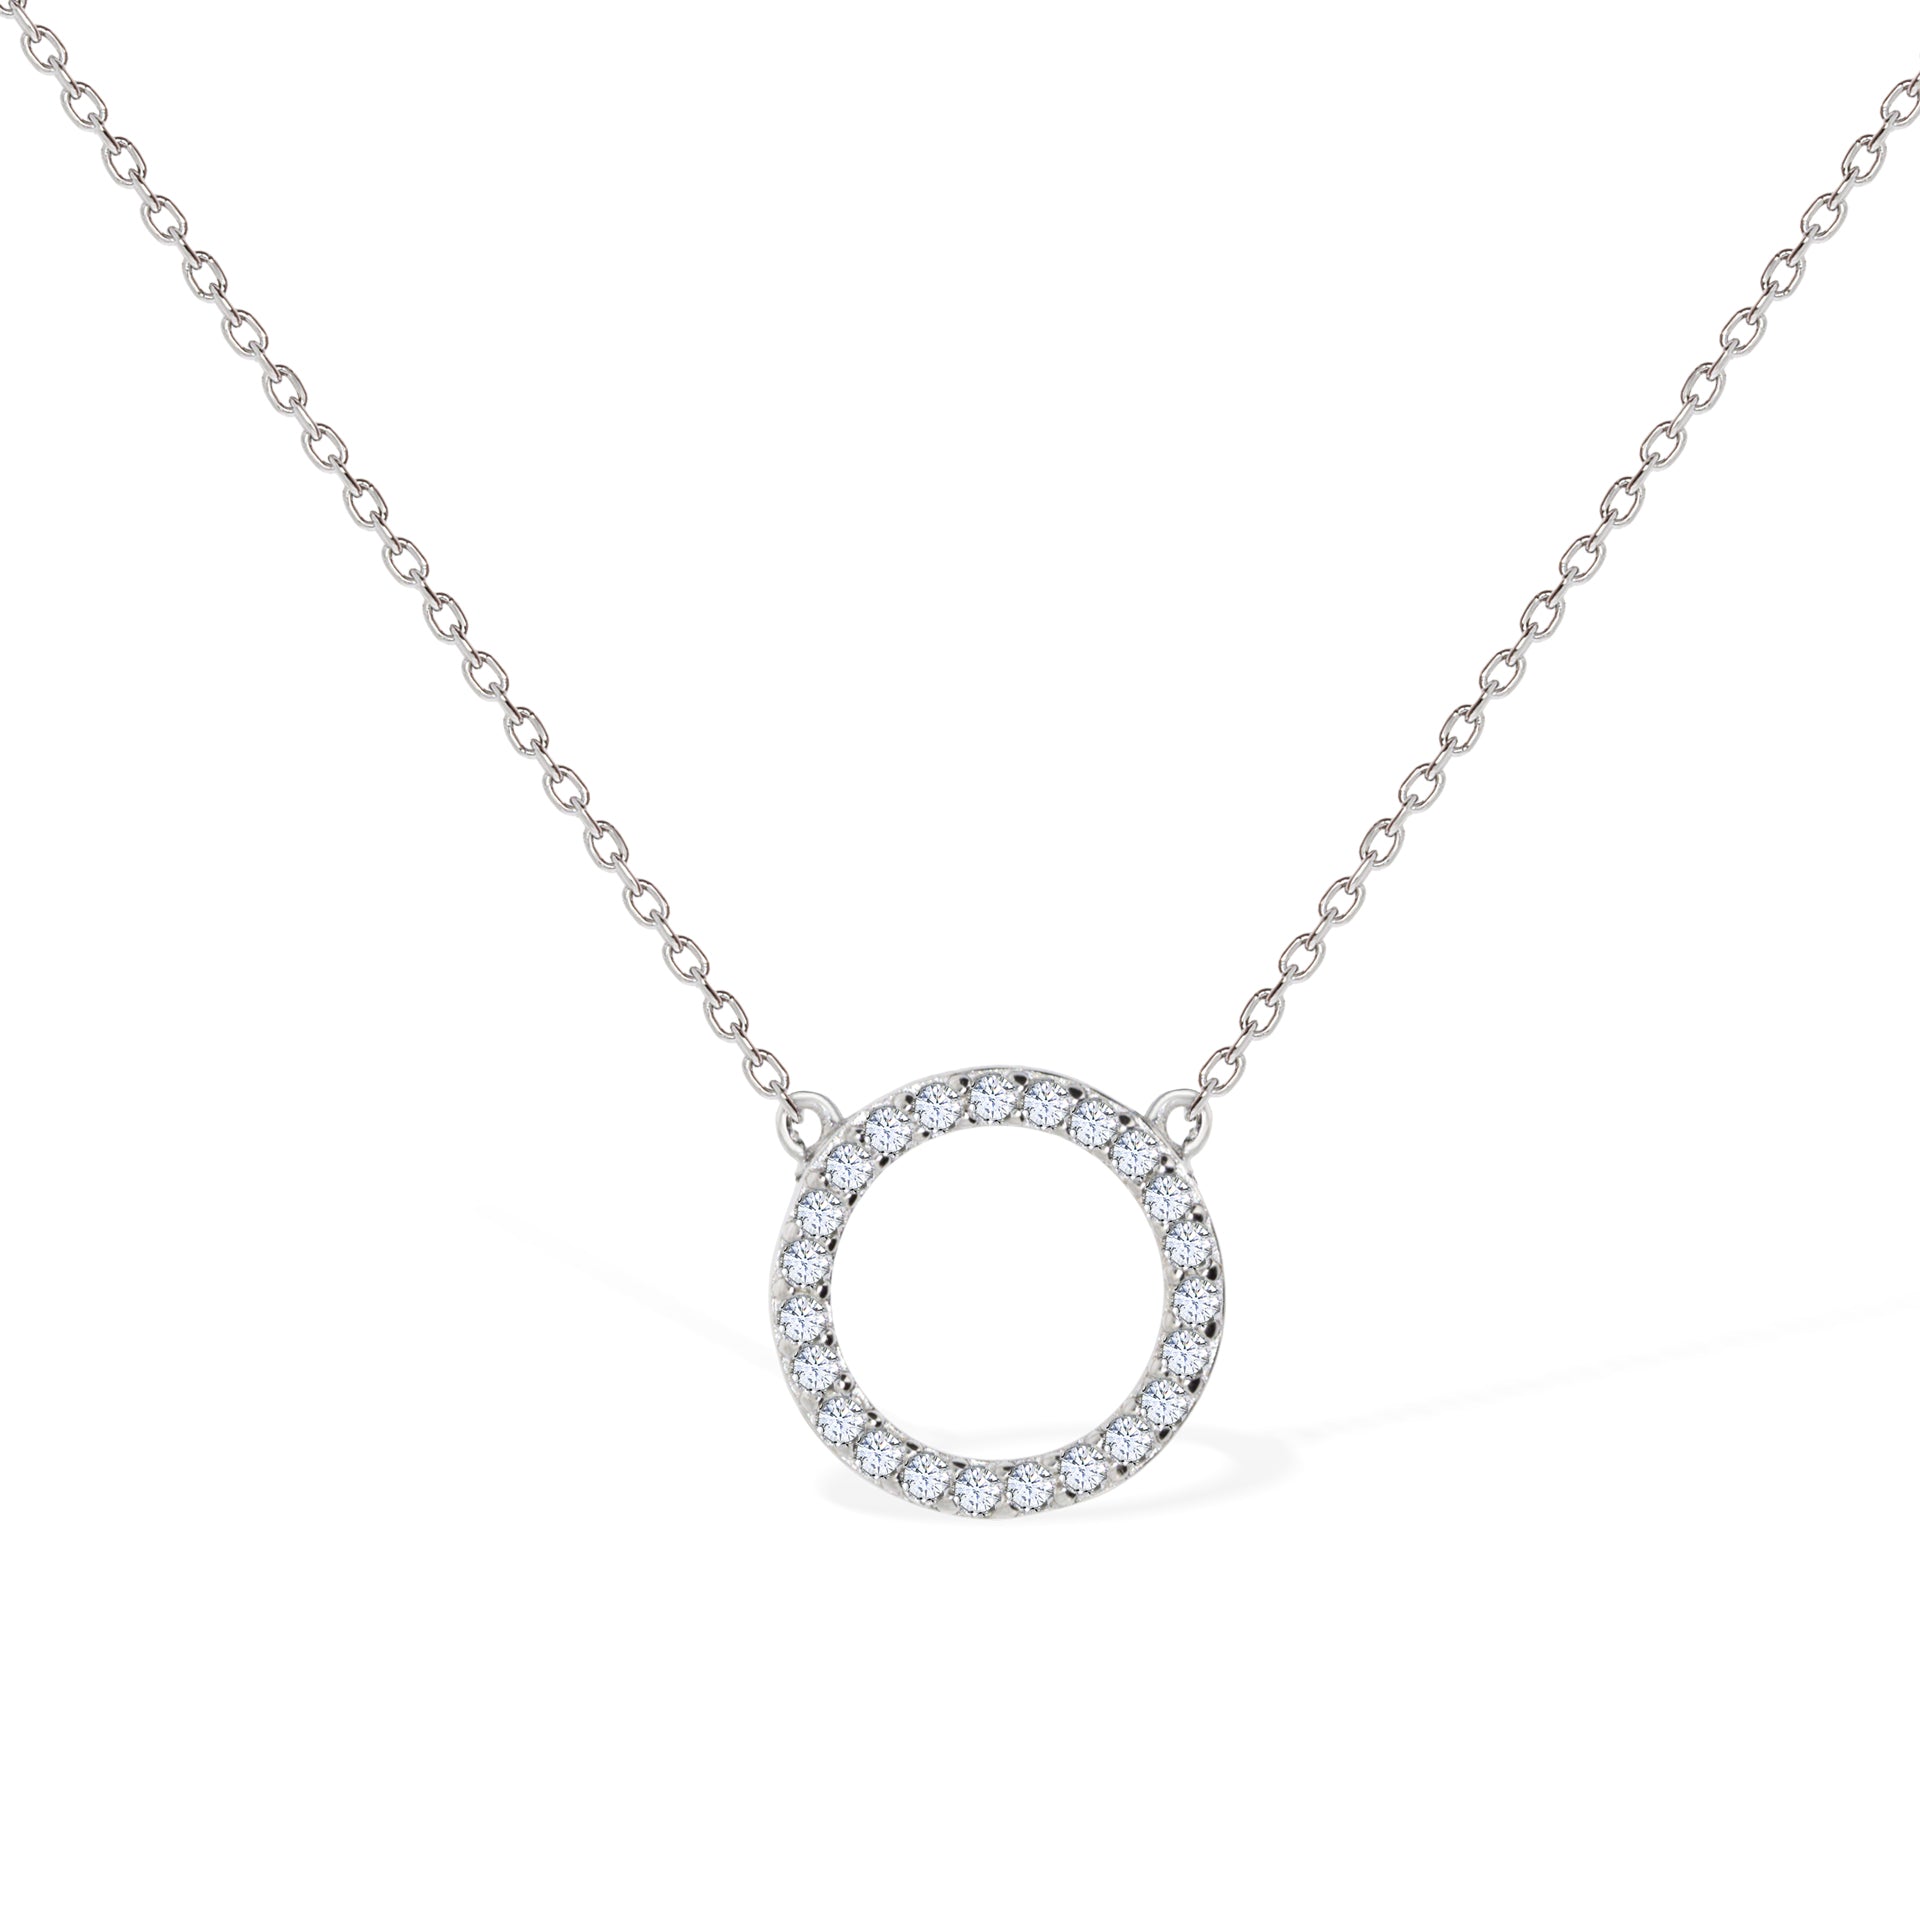 Gemvine Sterling Silver Round Small Halo Necklace Pendant + 18 Inch Adjustable Chain